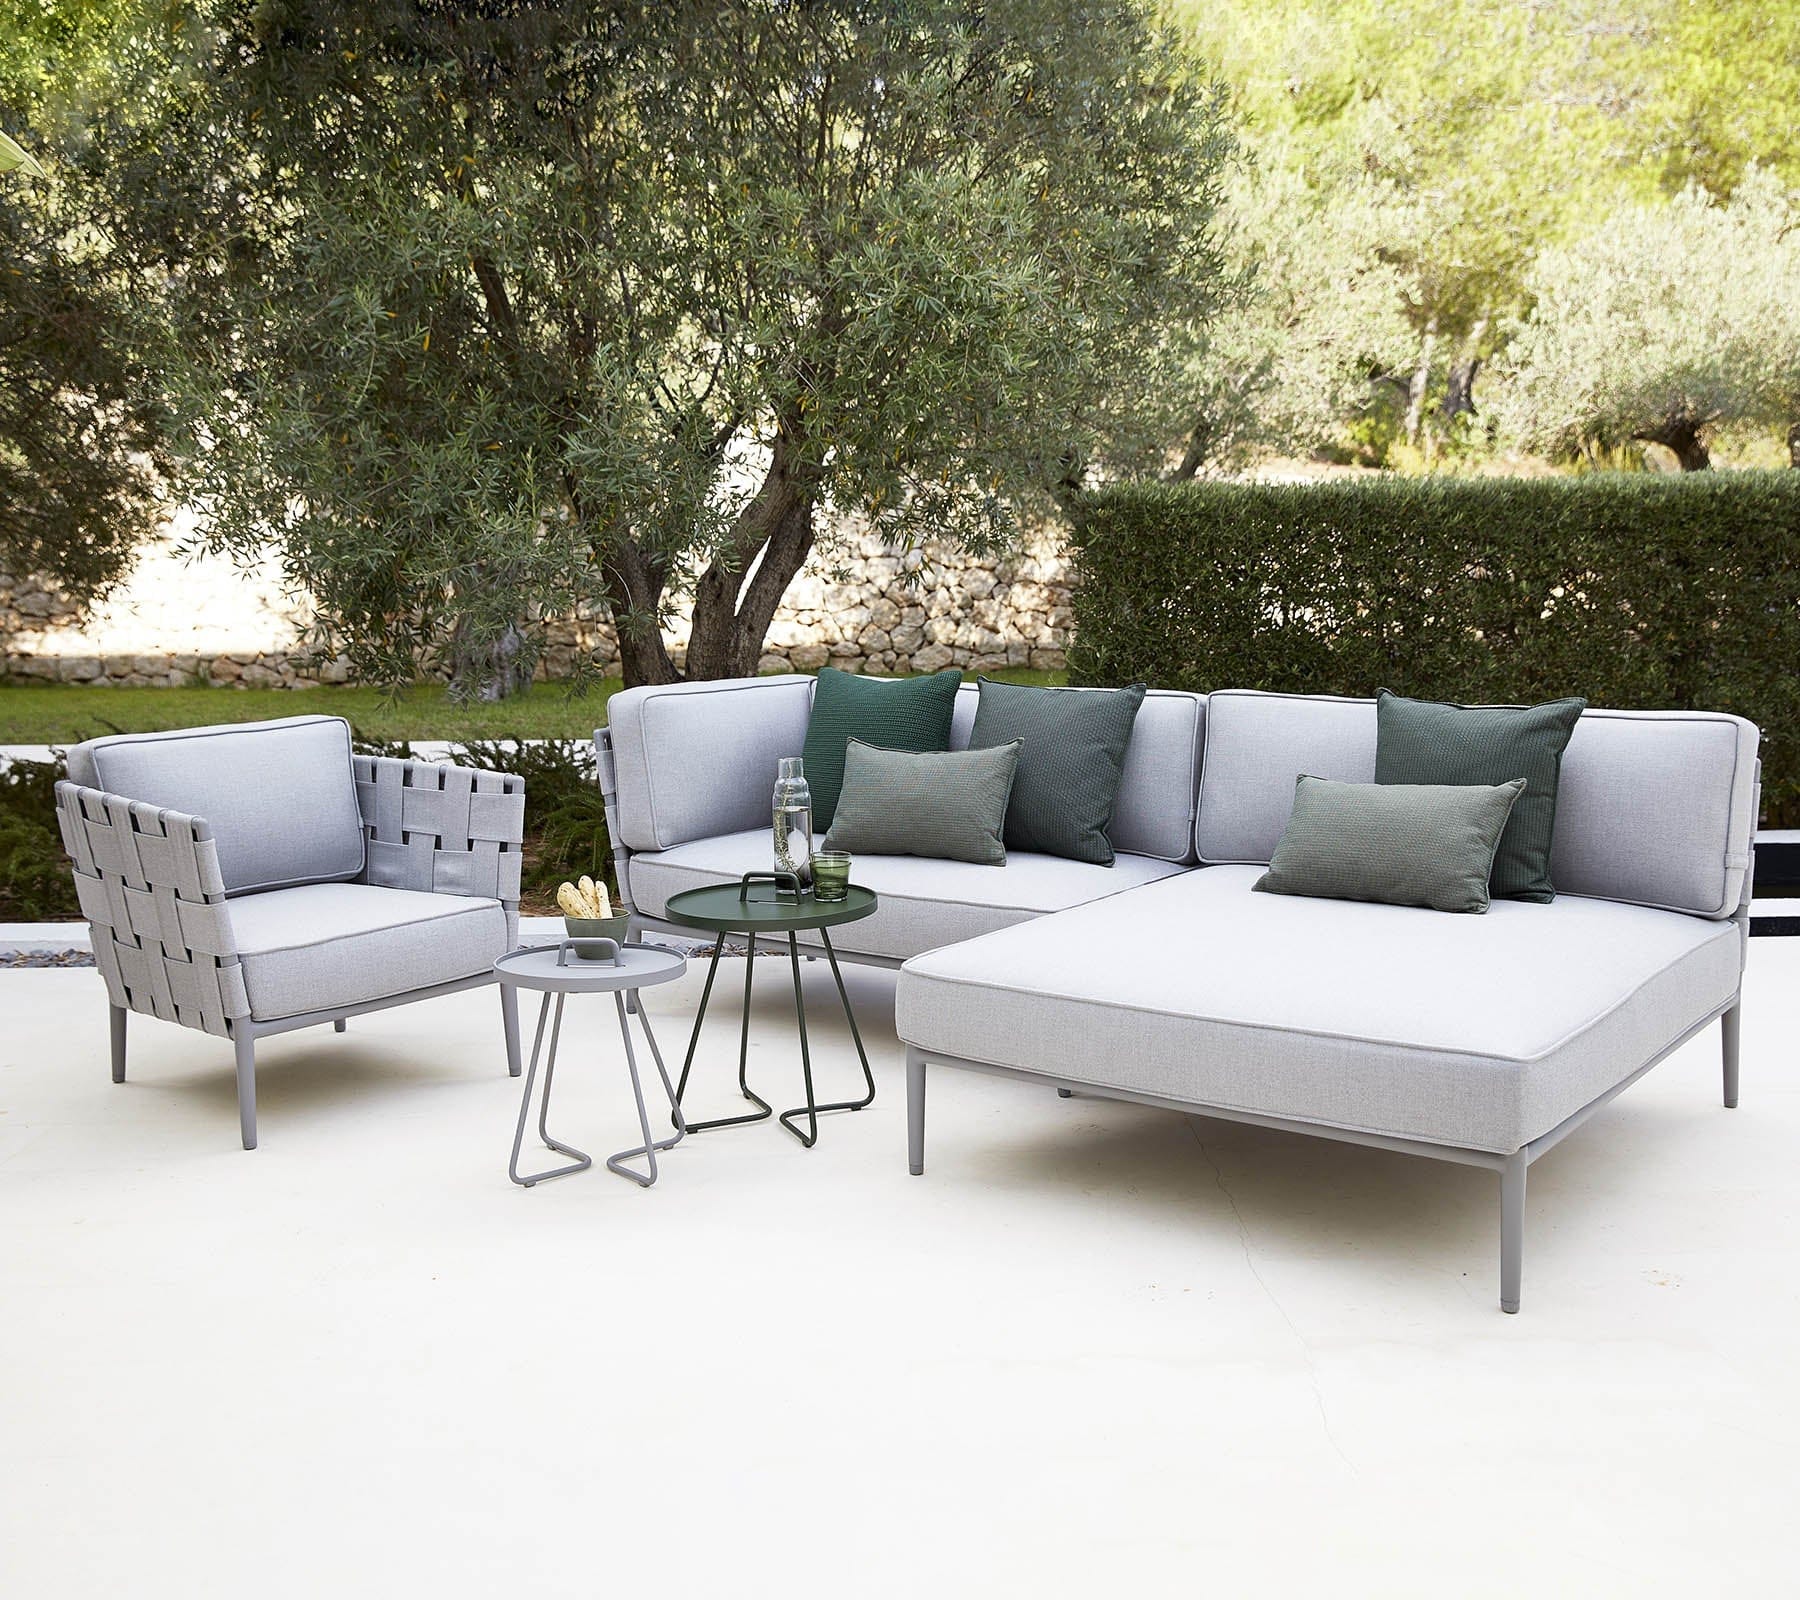 Boxhill's Conic Lounge Chair Light Grey lifestyle image with Conic Module Sofa at Patio